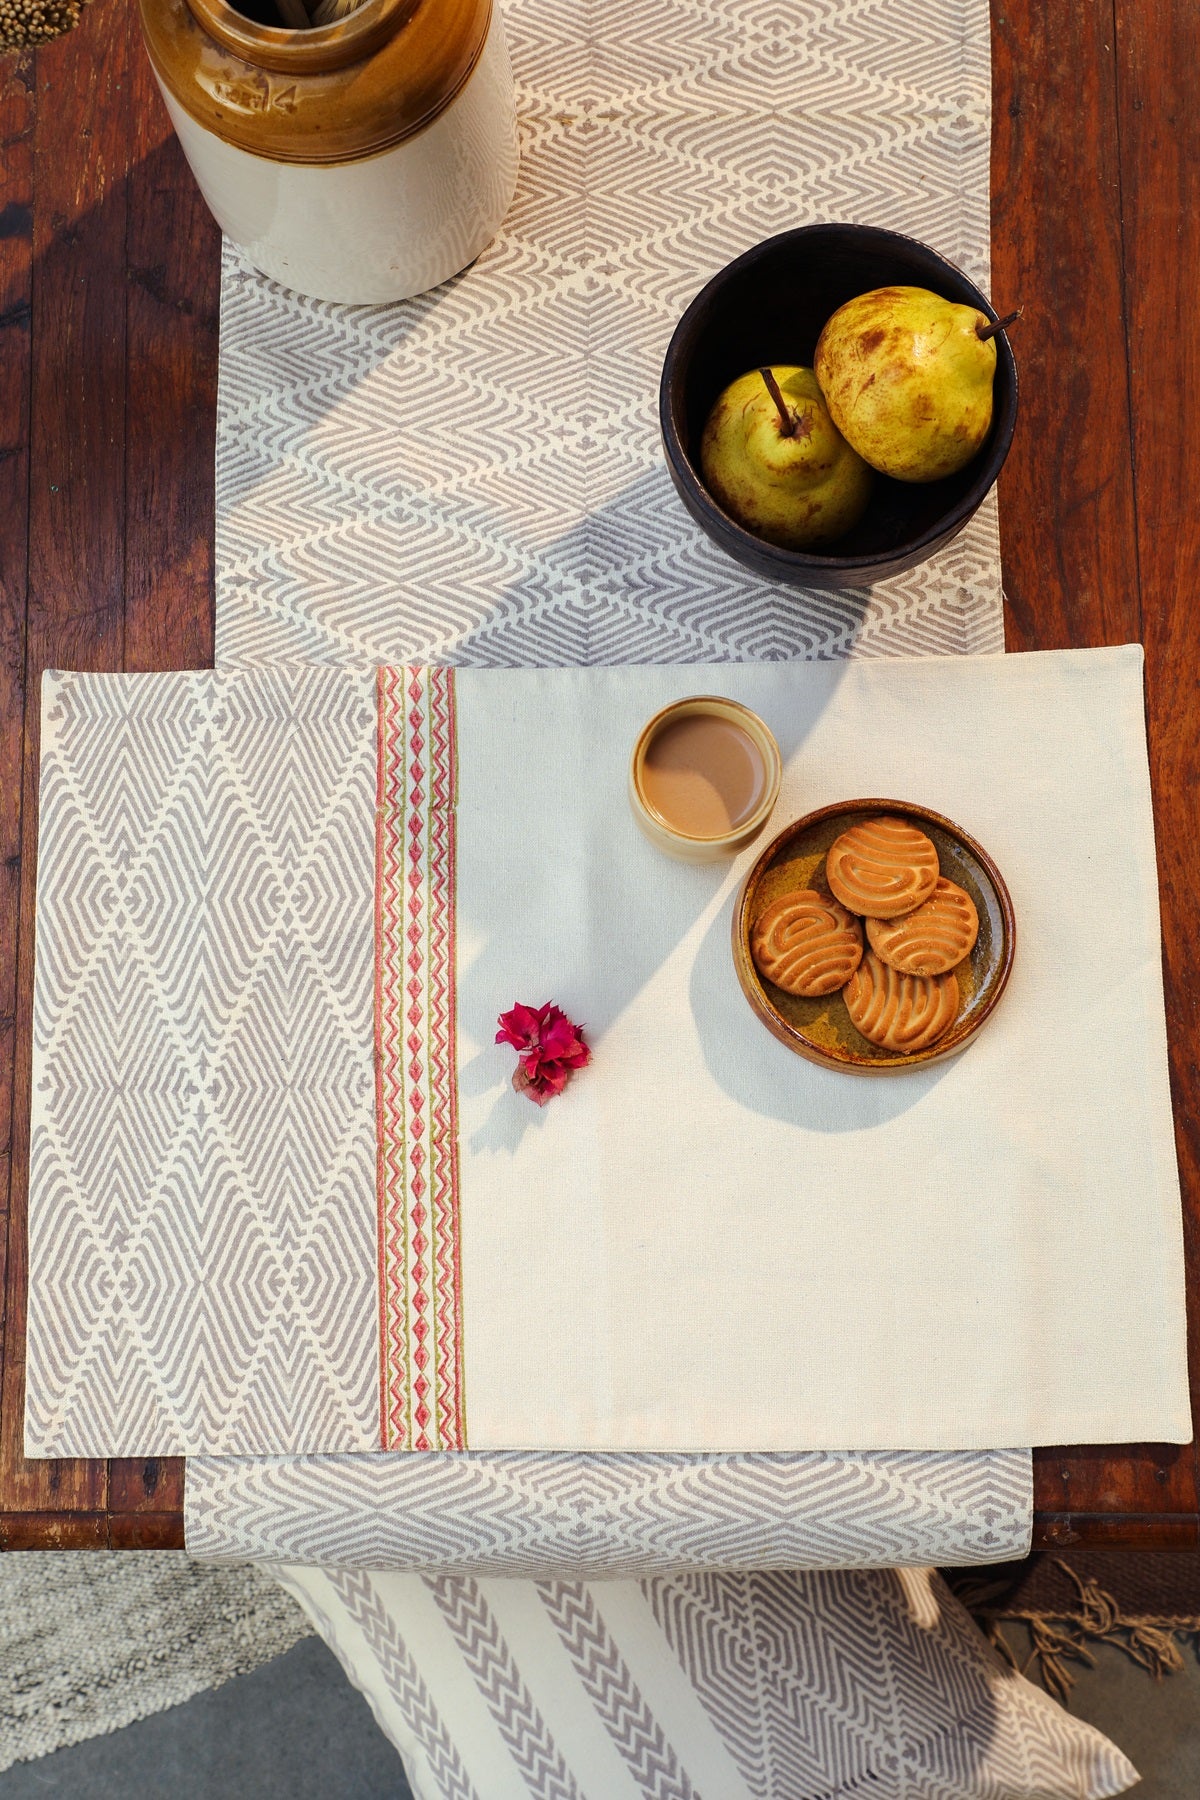 Aaira Grey Table Runner With Geometric Patterns